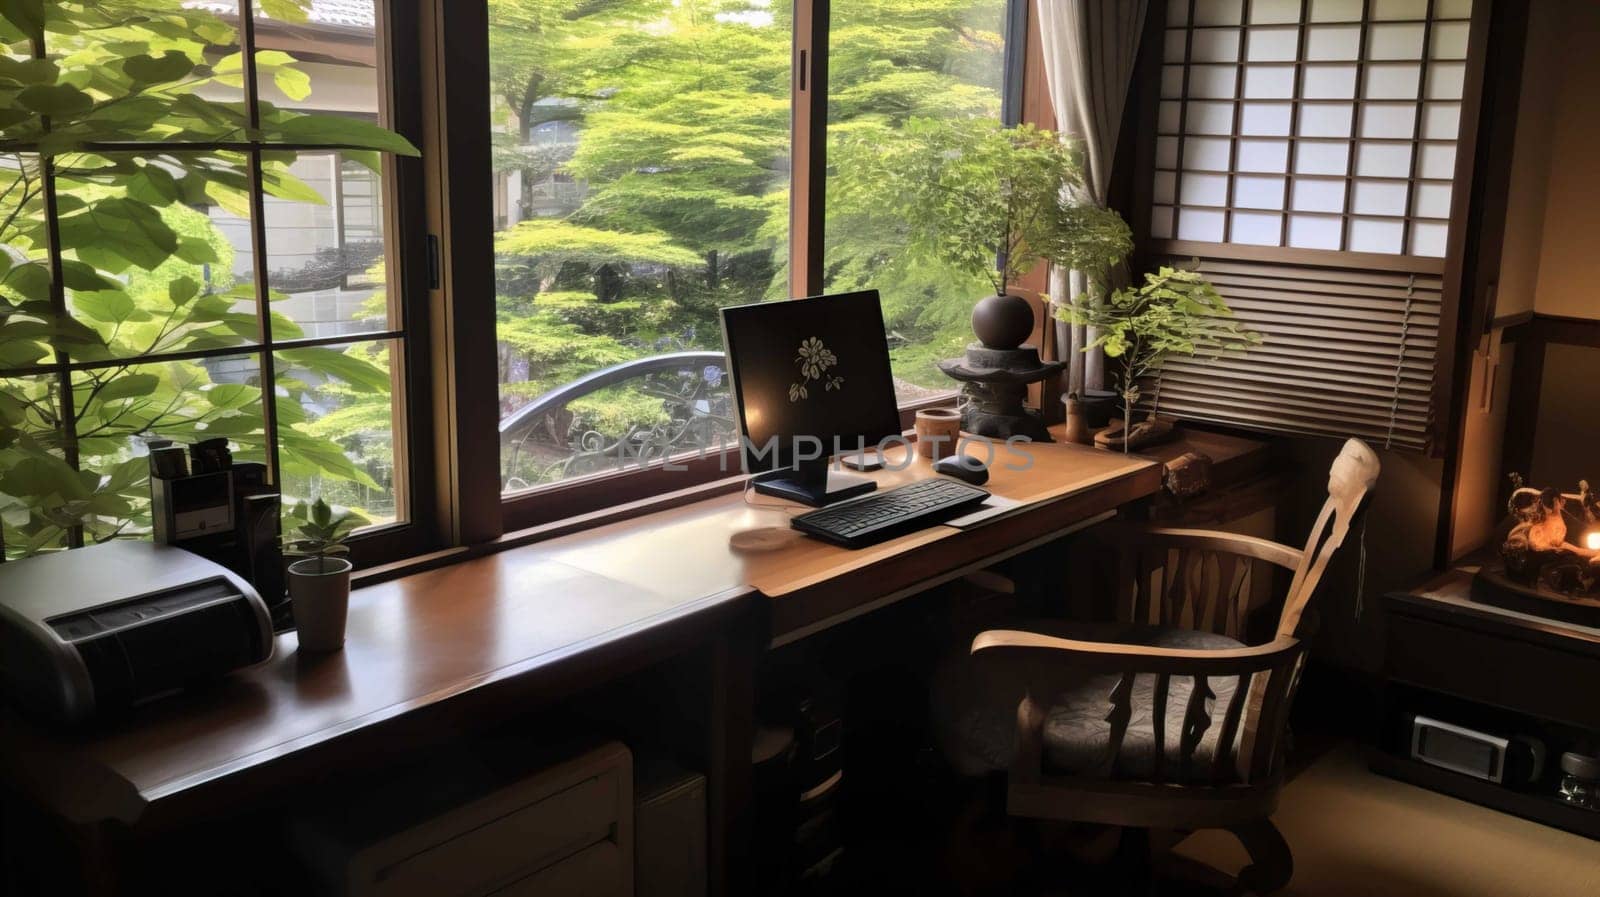  Home Office Space for Home Based Businesses in Japan , Generate AI by Mrsongrphc